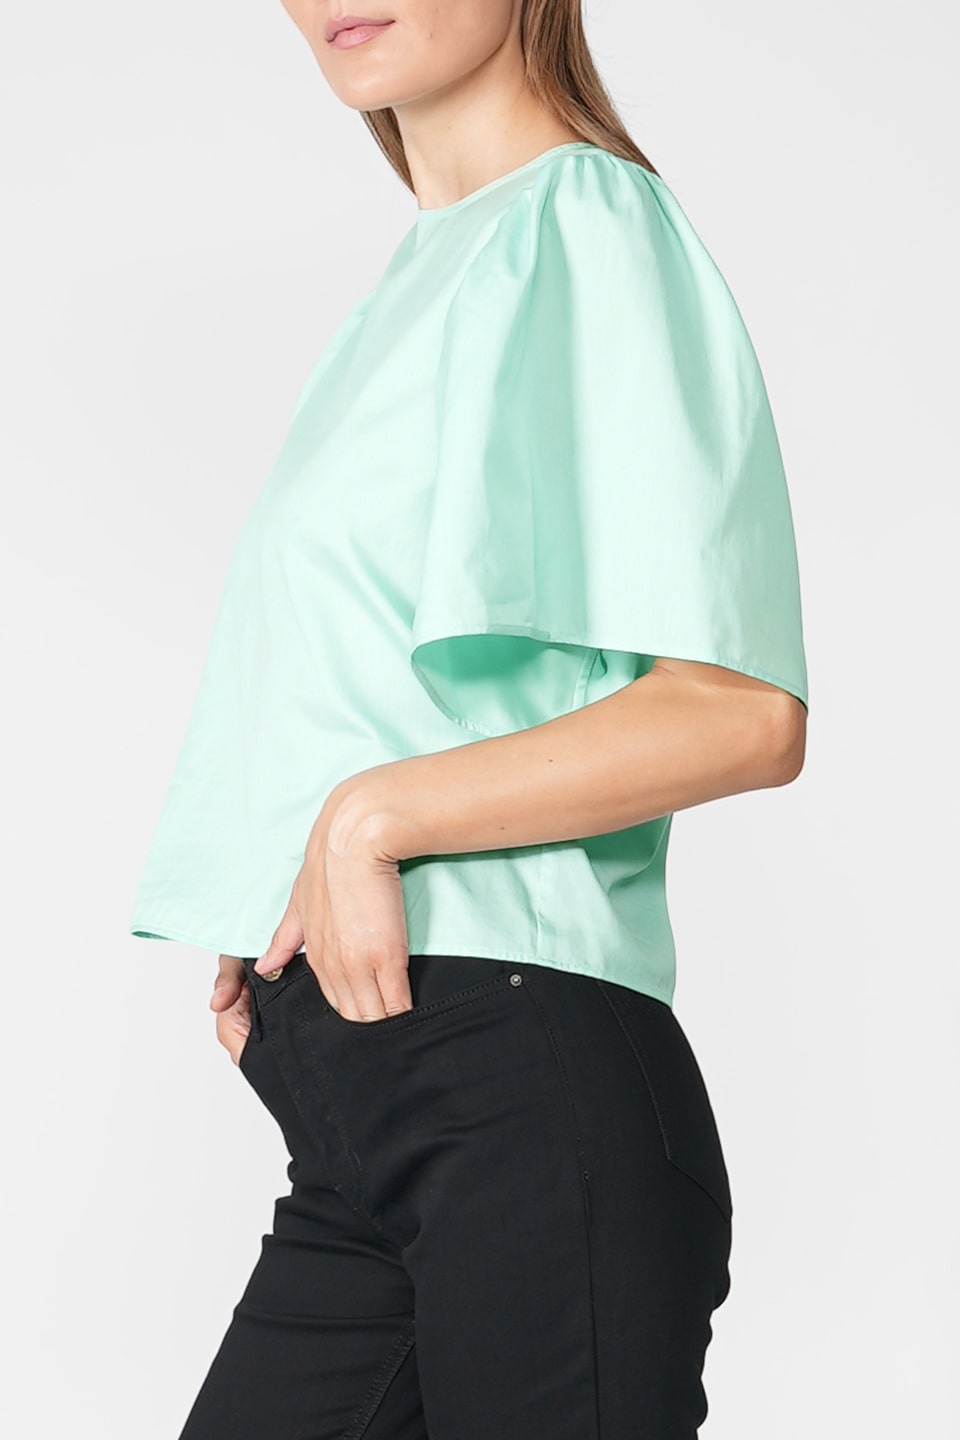 Designer Green Women short sleeve, shop online with free delivery in UAE. Product gallery 3